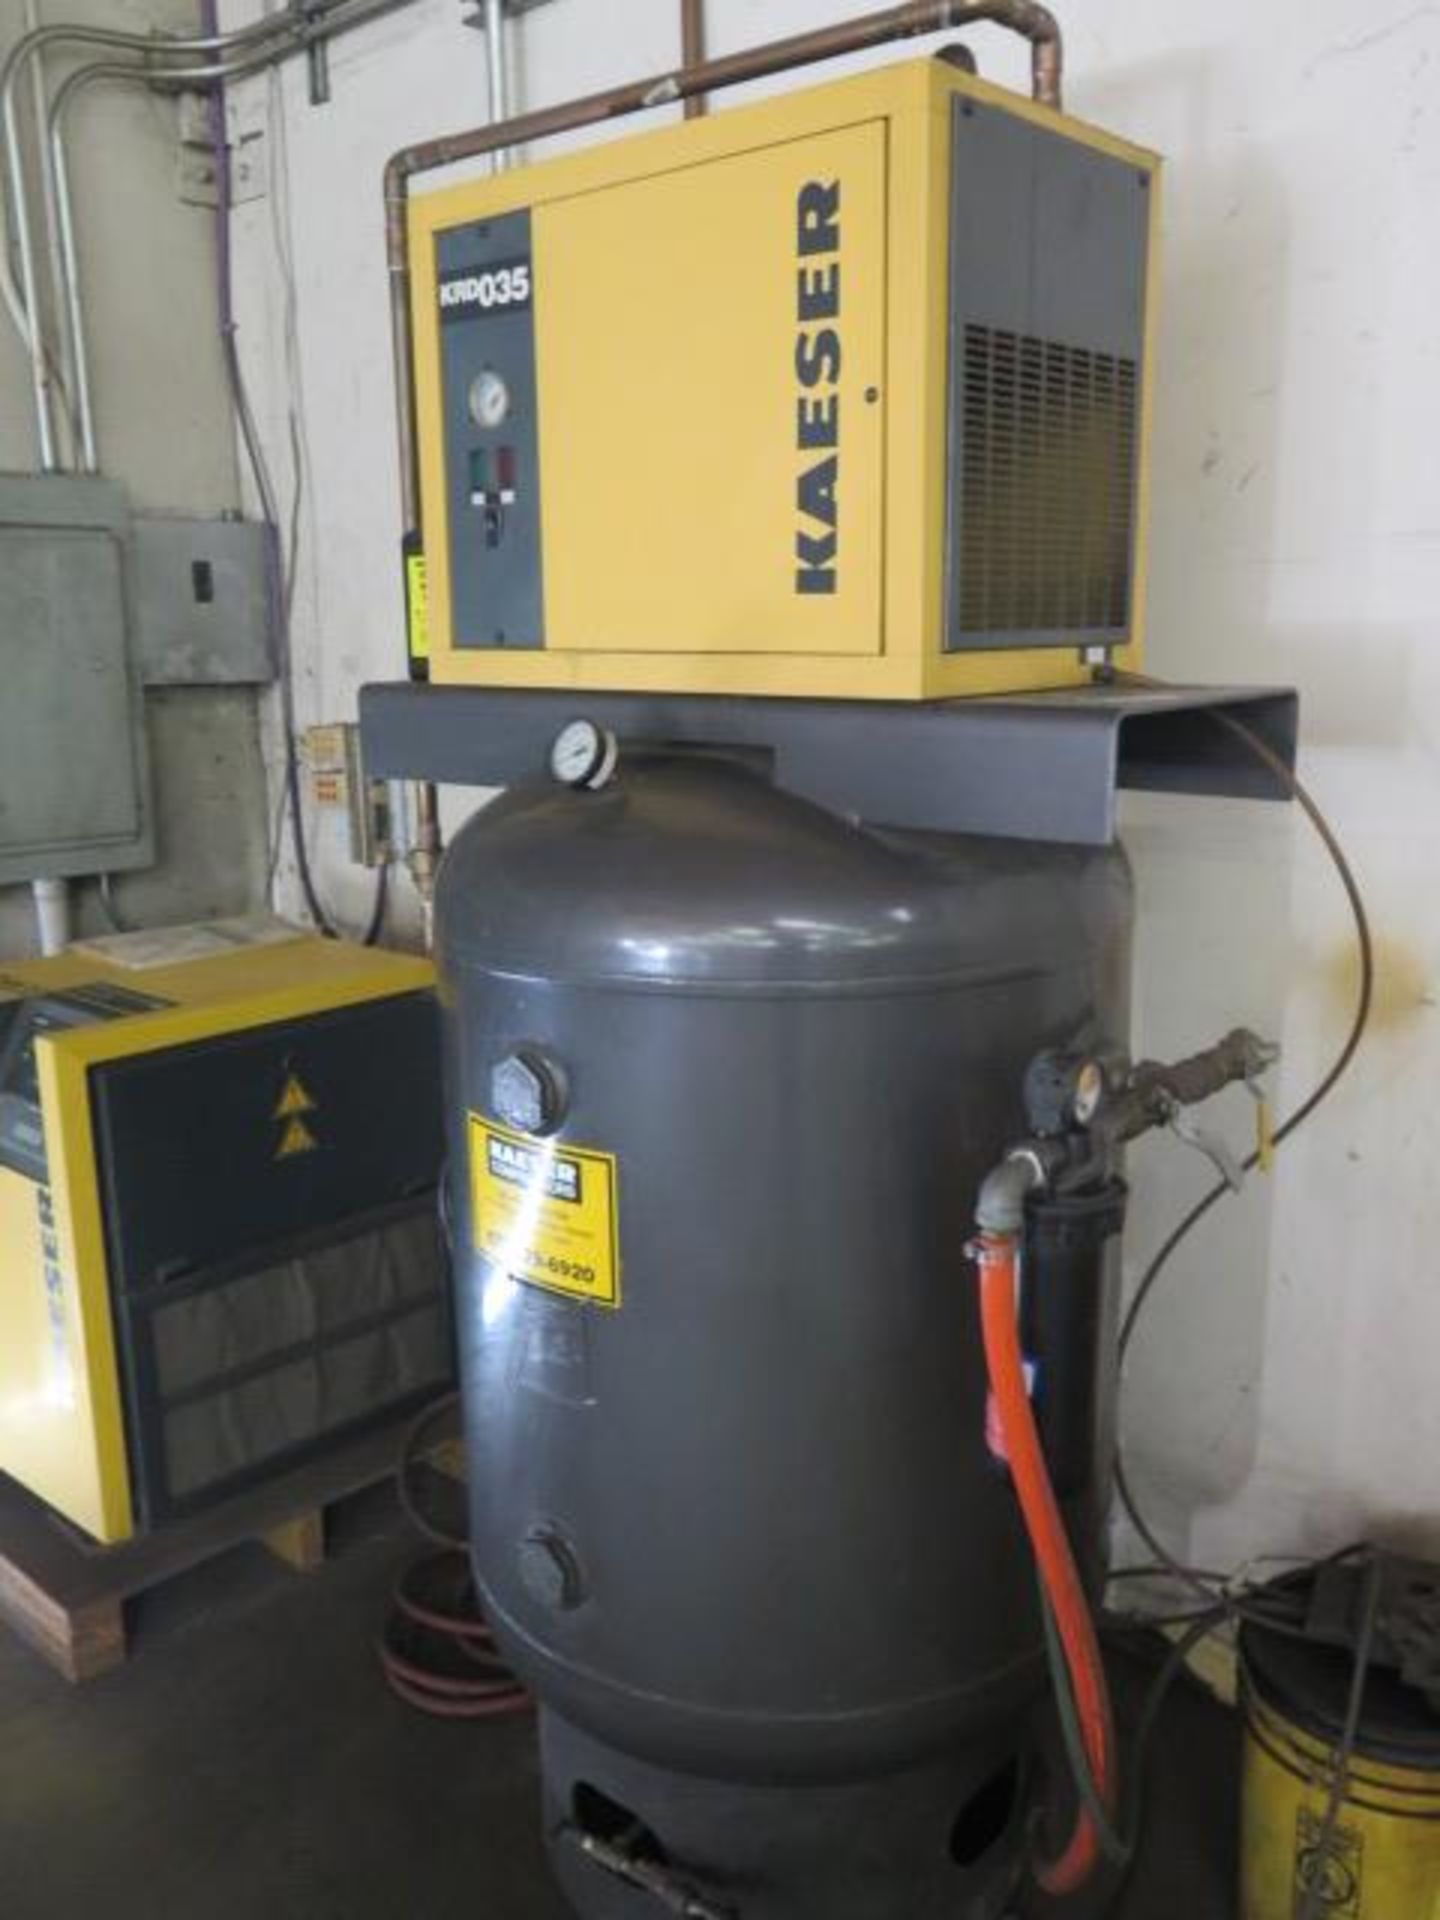 2006 Kaeser SM11 10Hp Rotary Air Compressor s/n 1220 w/ Dig Controls, 42 CFM @ 110 PSIG31,SOLD AS IS - Image 11 of 15